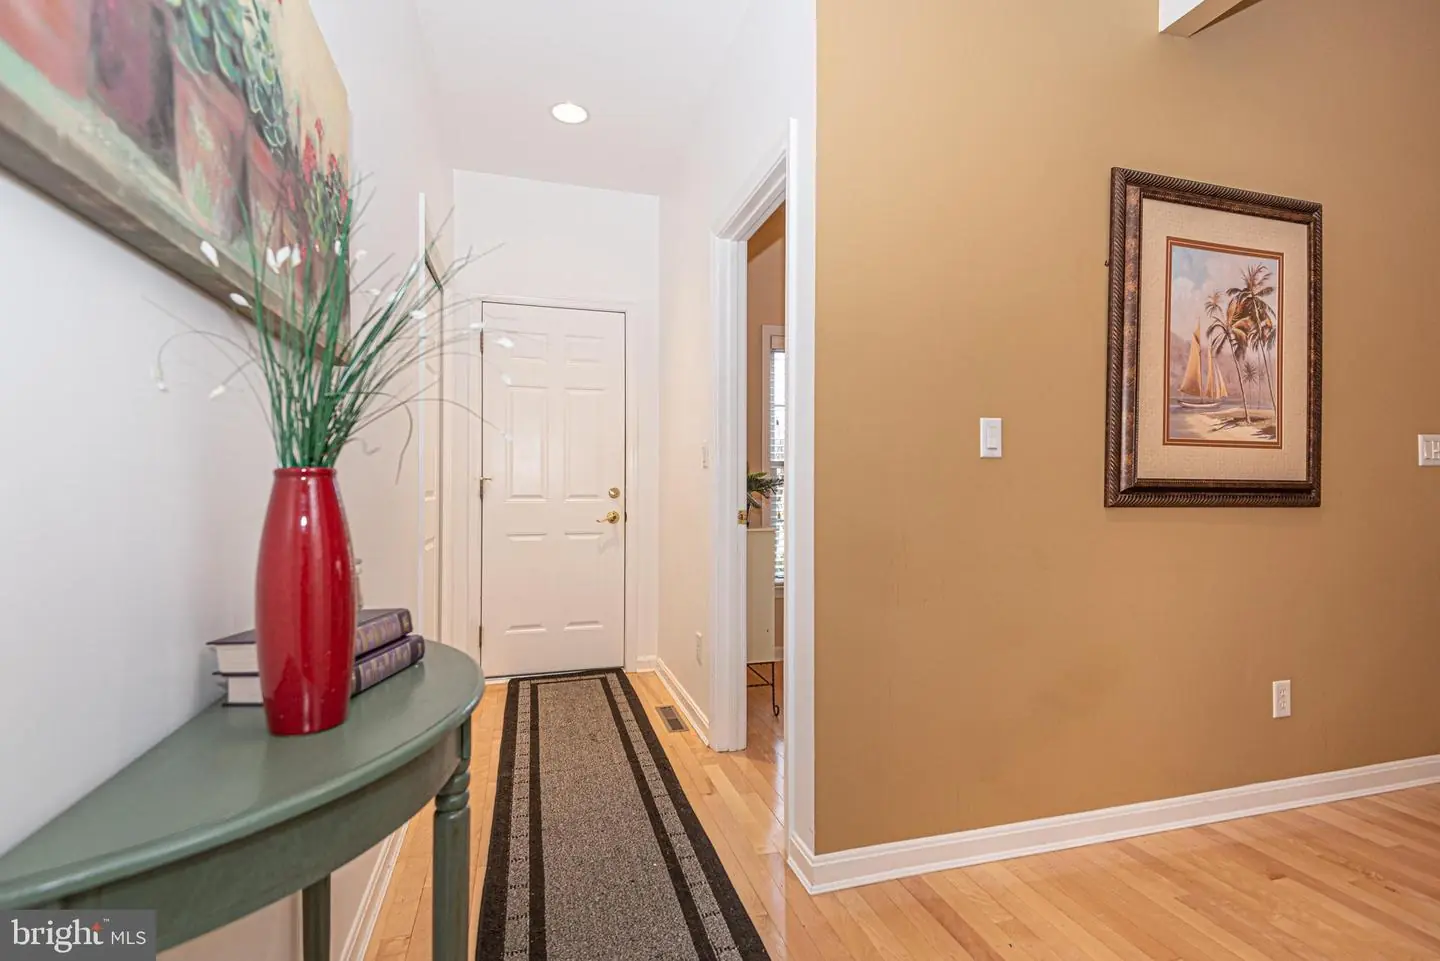 MDWO2019426-802903999706-2024-03-08-00-14-49 106 Pine Forest Dr | Berlin, MD Real Estate For Sale | MLS# Mdwo2019426  - 1st Choice Properties